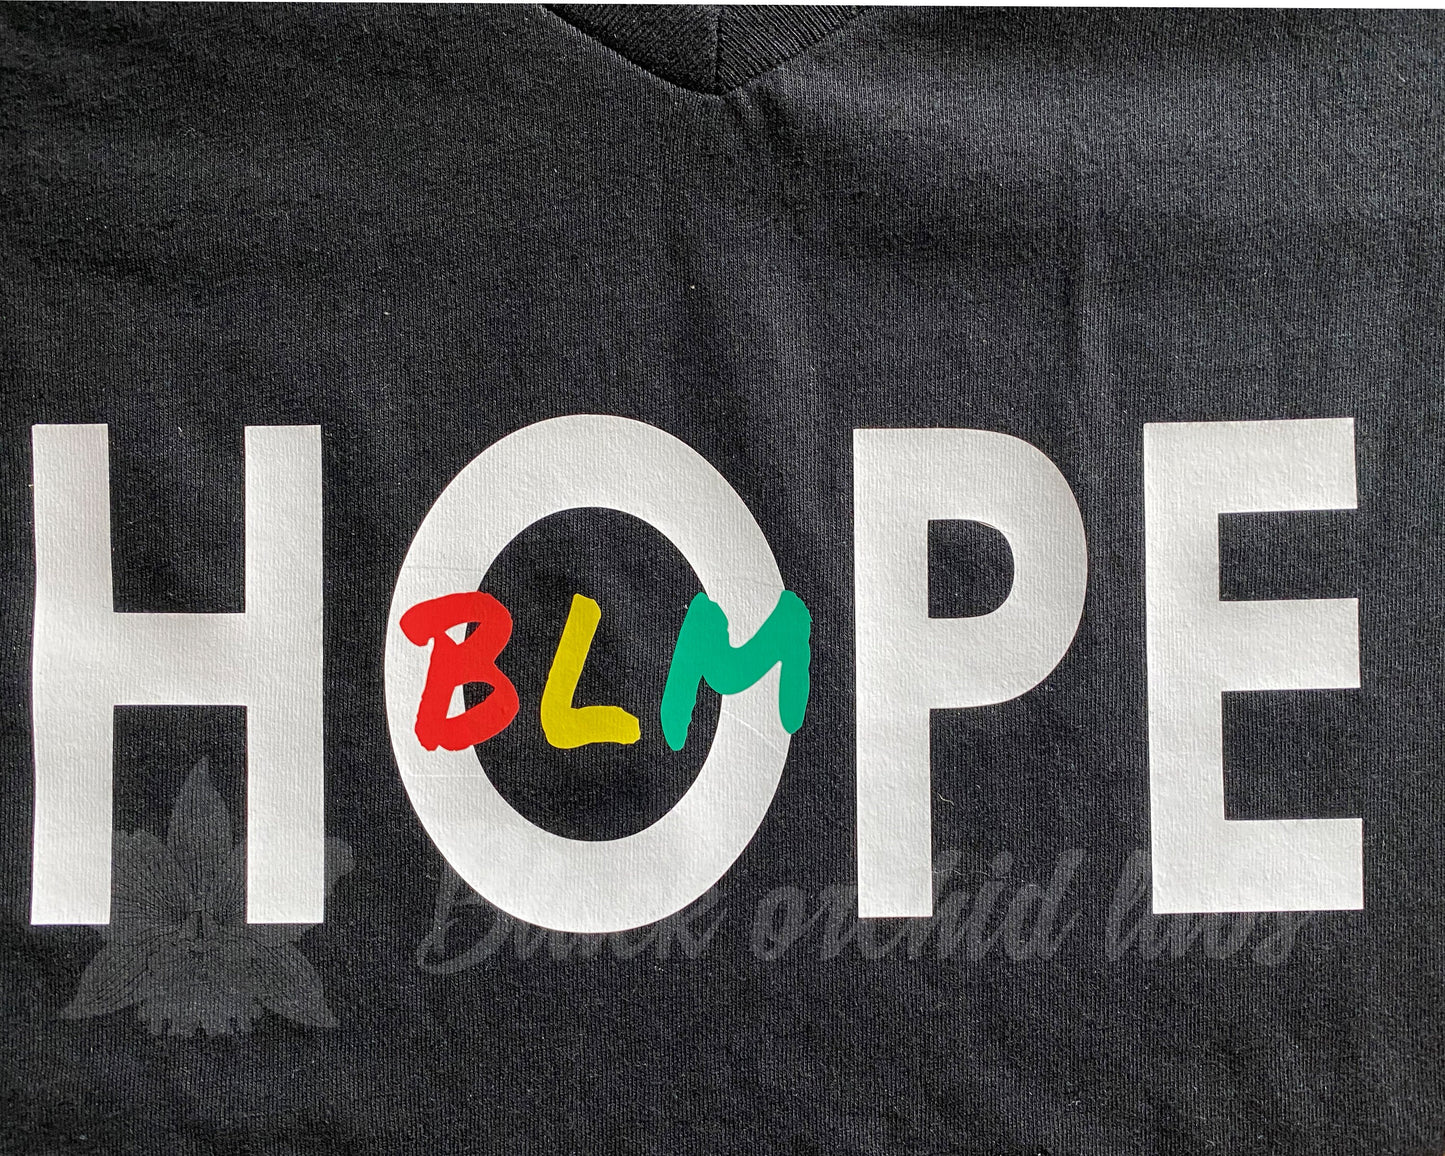 Hope, Black Lives Matter Tote, T-shirt, Hoodie, or Tank, BLM, March shirt, Ally Hoodie